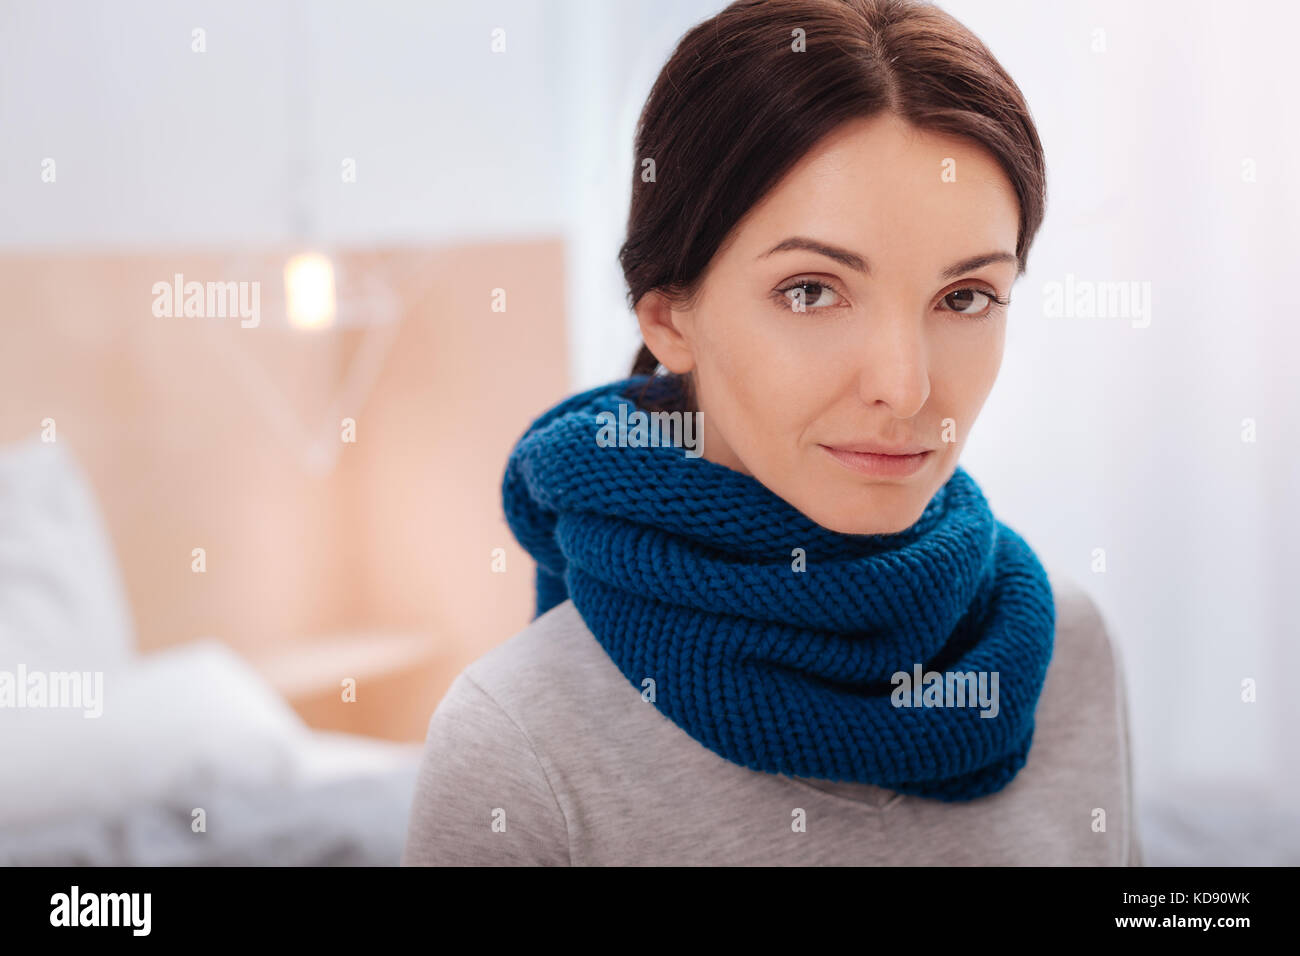 Portrait of a serious concentrated woman Stock Photo